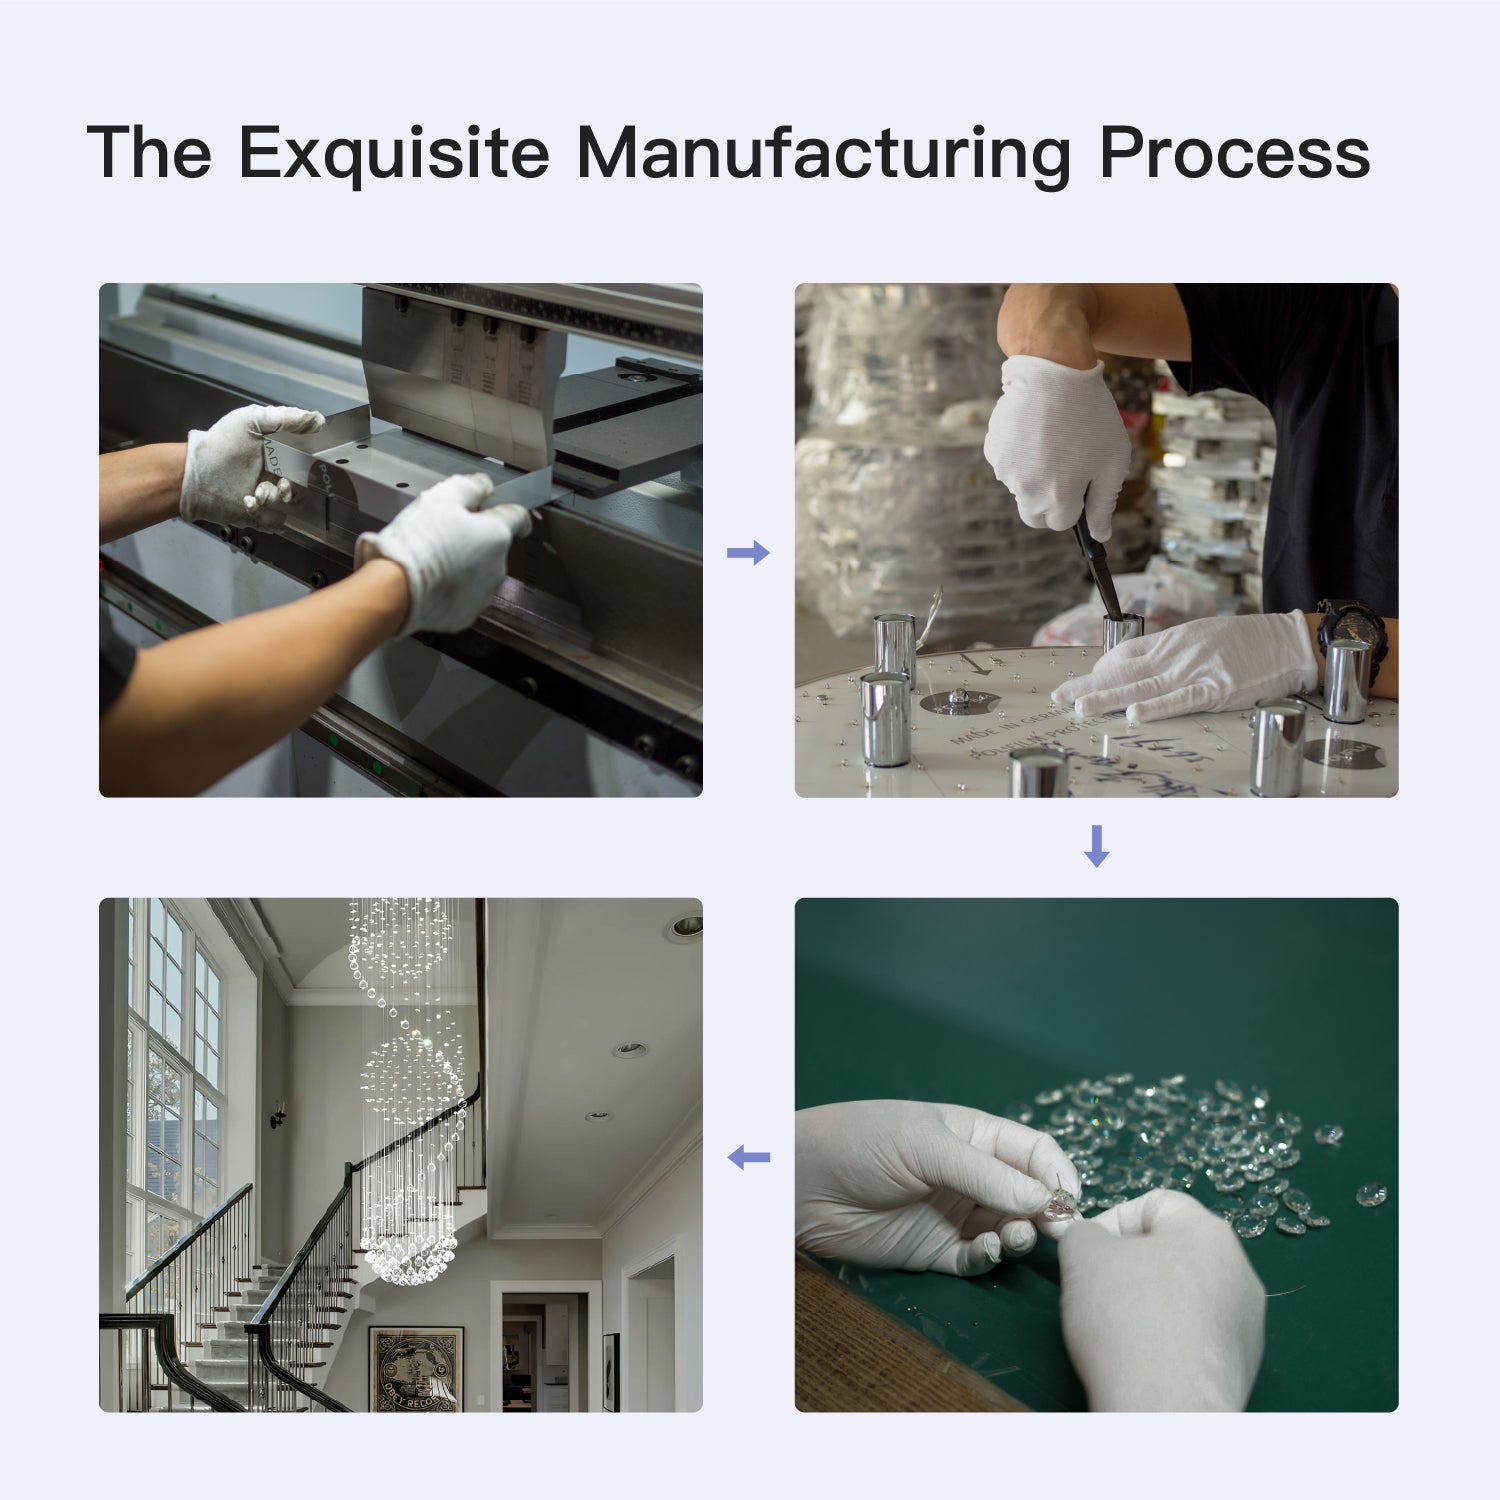 The Exquisite Manufacturing Process